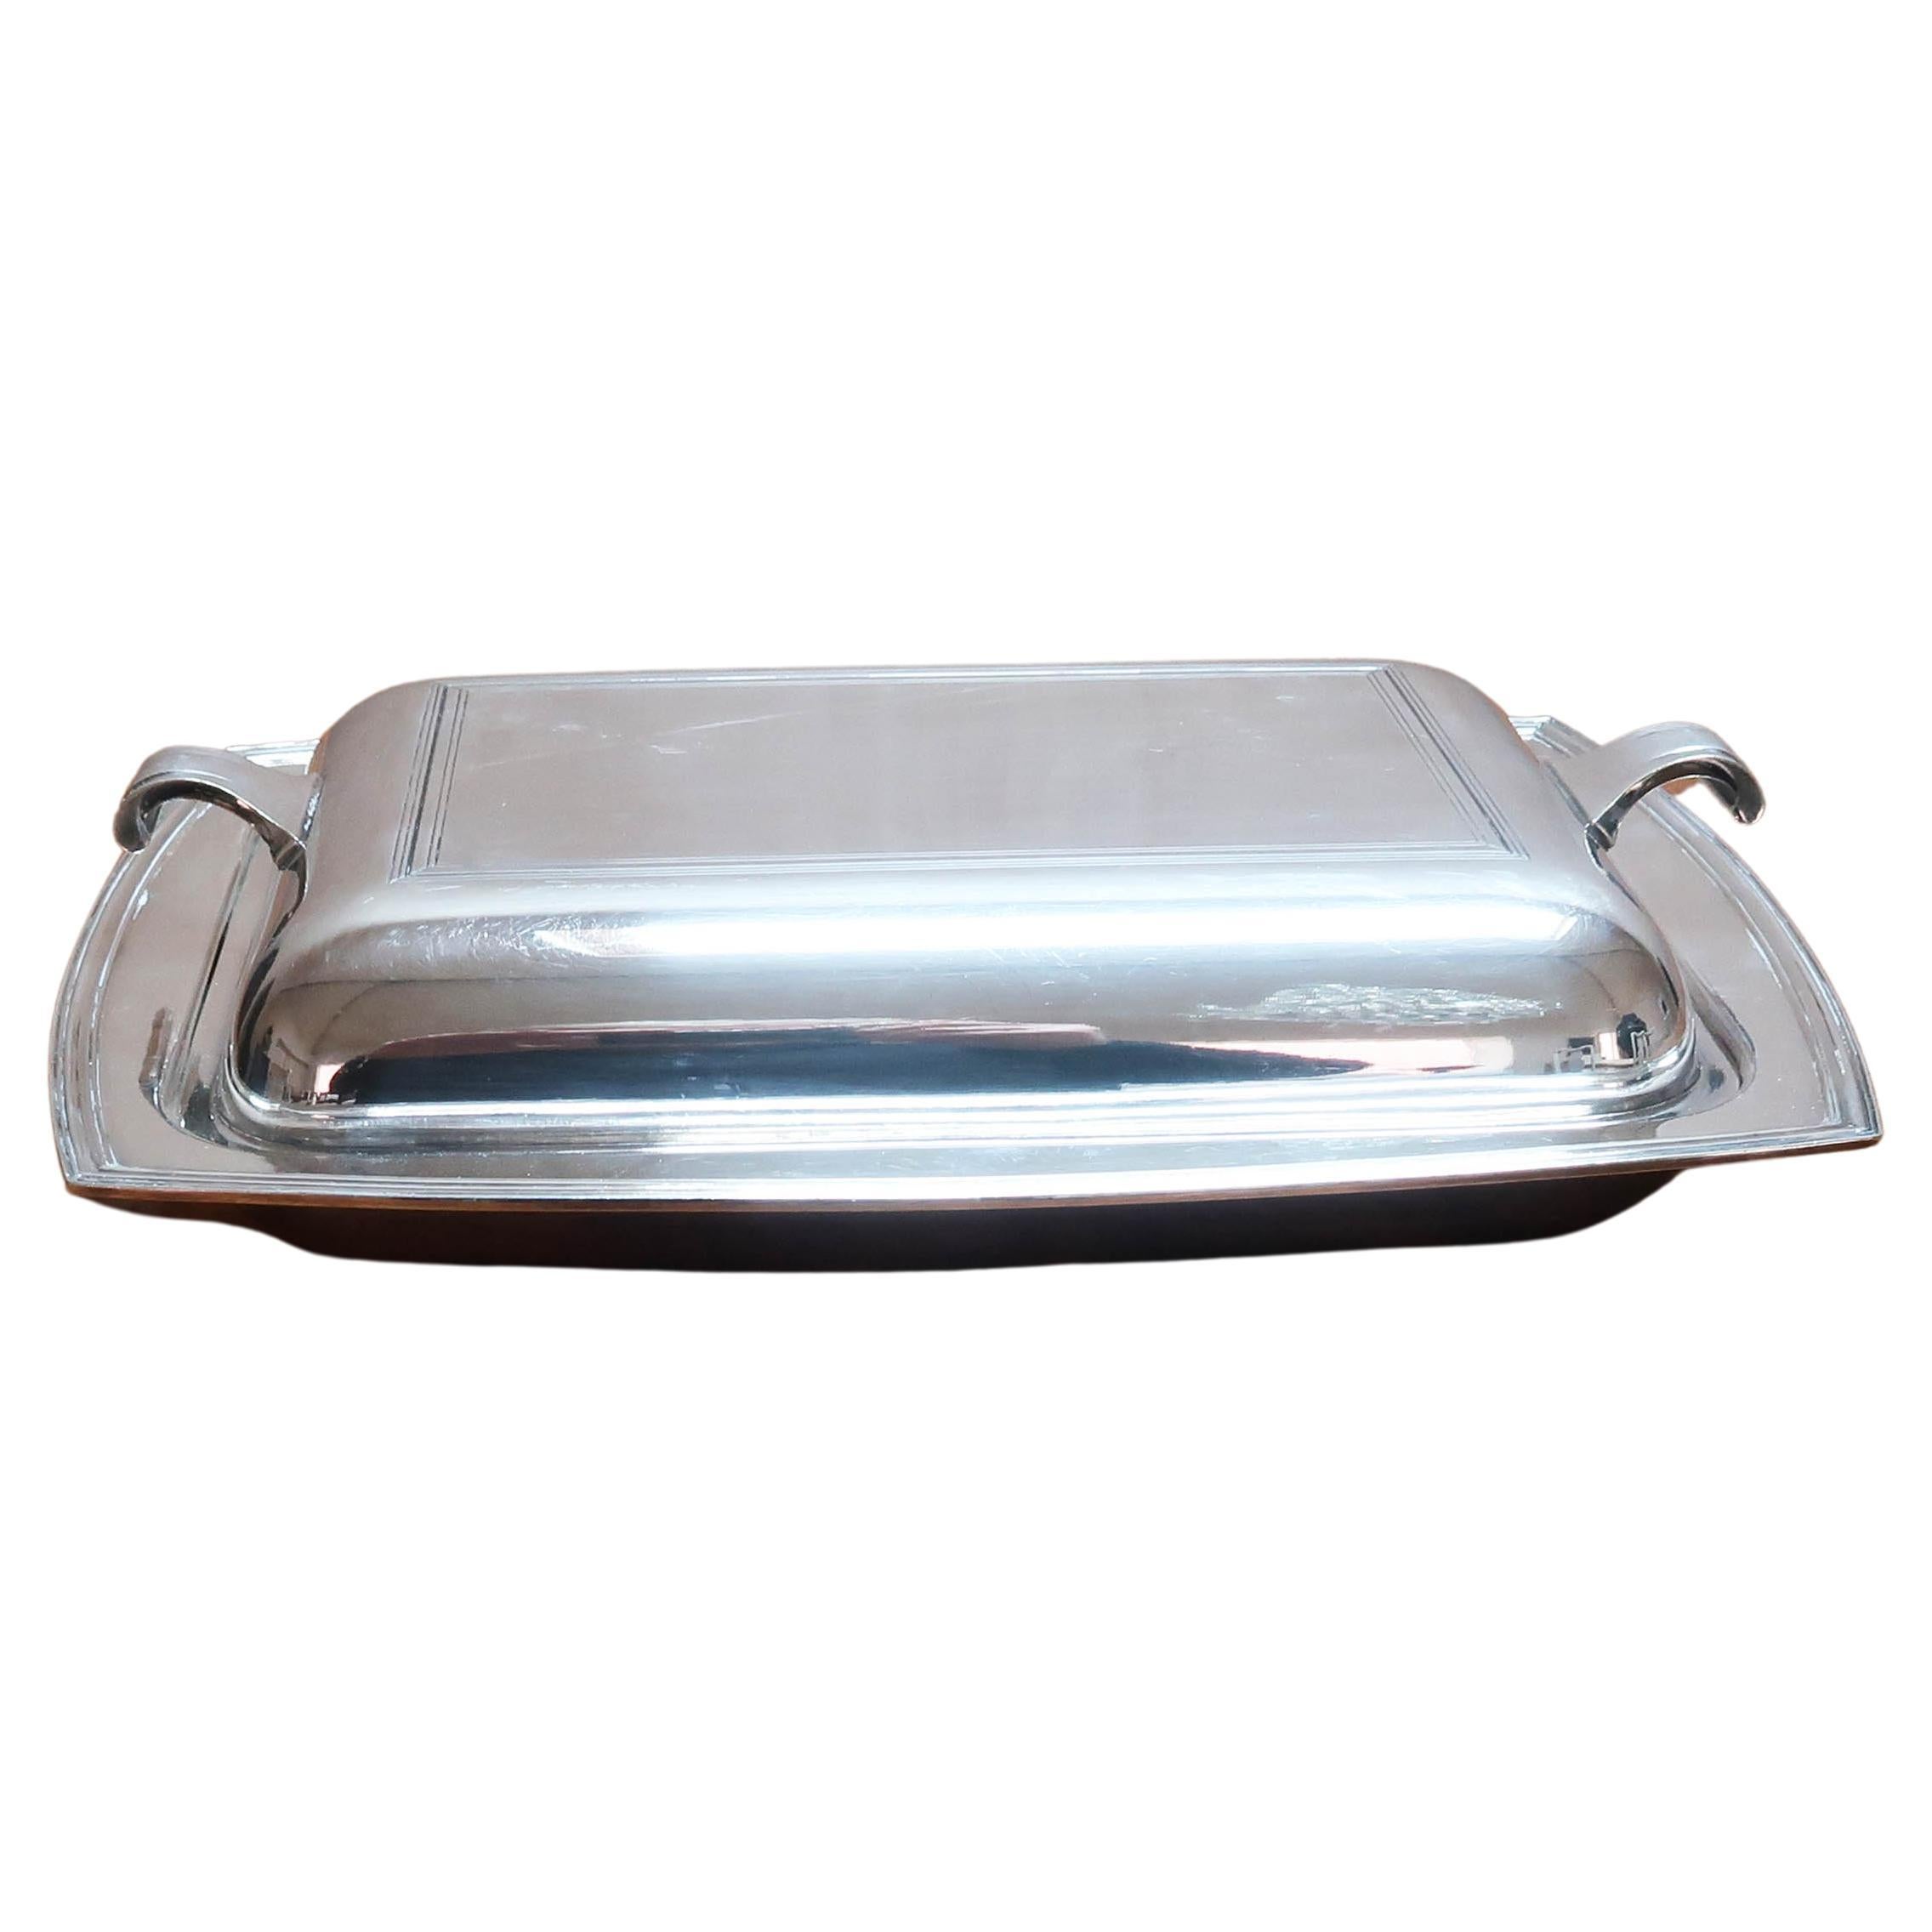 Art Deco Silver Plated Entree or Serving Dish, English C.1930